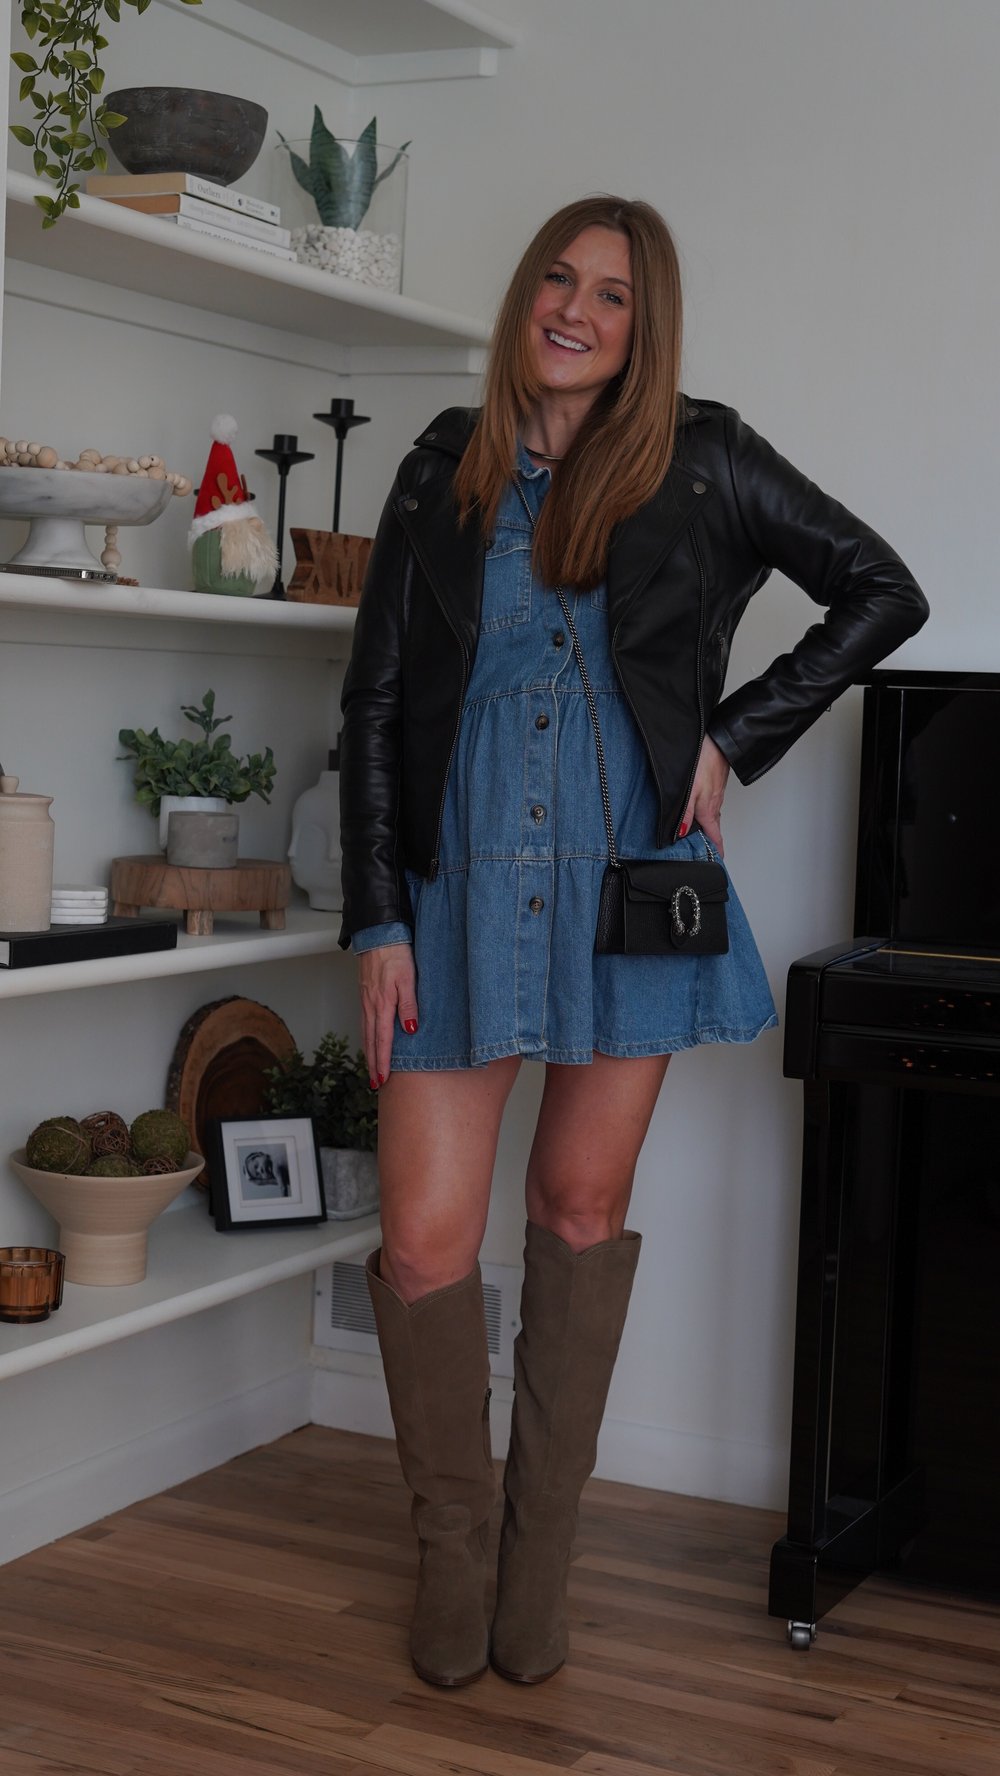  Jessica Ashley wears The Jacket Maker Flashback leather jacket in size XS with Free People denim dress, Blondo suede knee-high boots and Gucci Dionysus small cross body bag | best leather jackets for women 